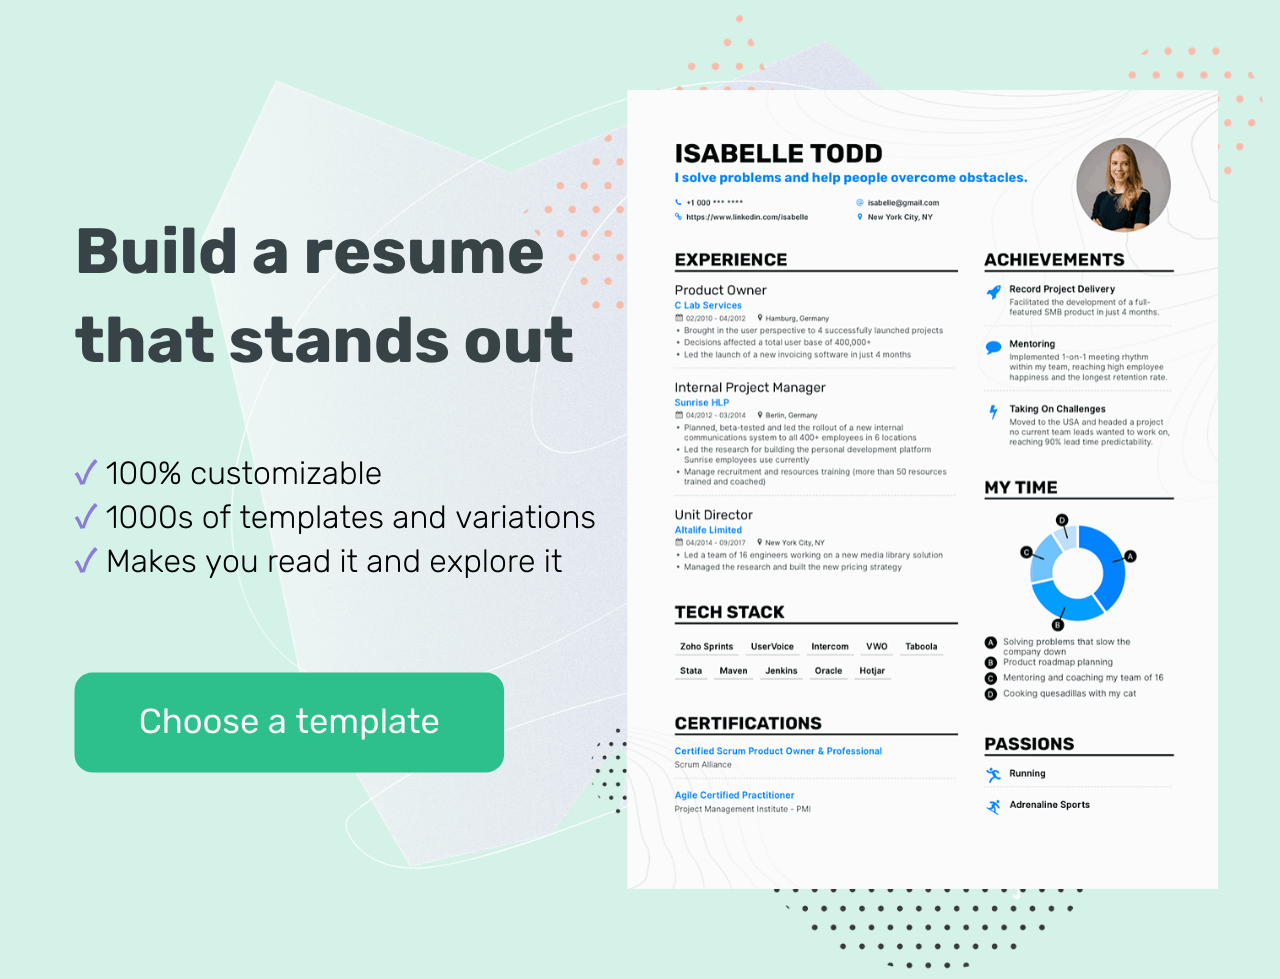 Enhancv The Best Resume Formats You Need to Consider (5+ Examples Included) 